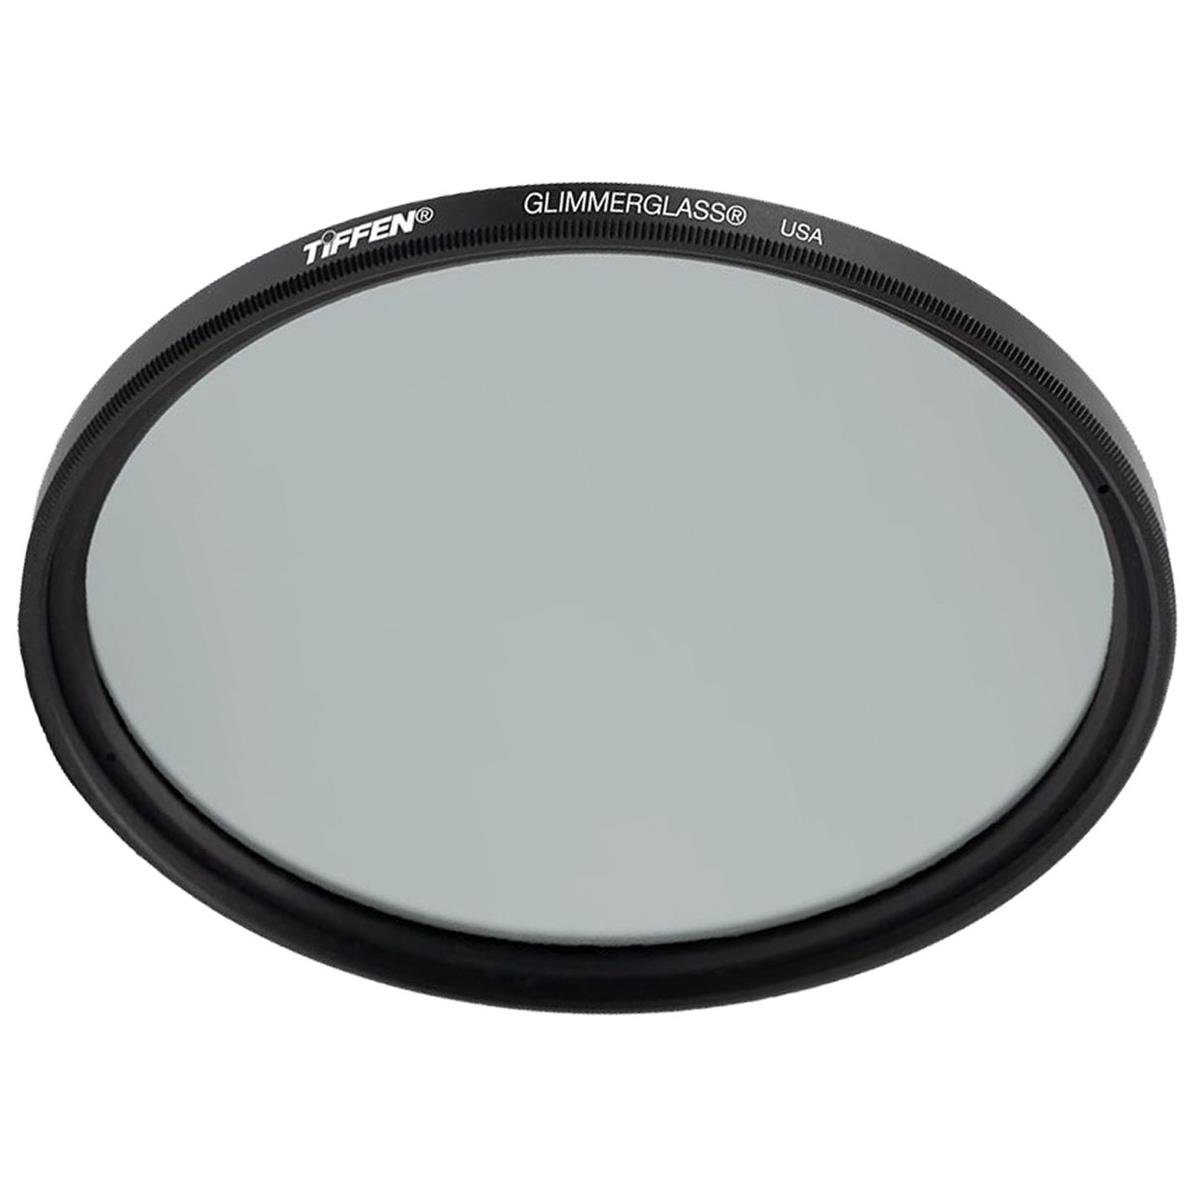 50% Off Tiffen Glimmerglass Diffusion Filter #5: 49mm $32.50, 77mm  $62.50 & More + free s/h